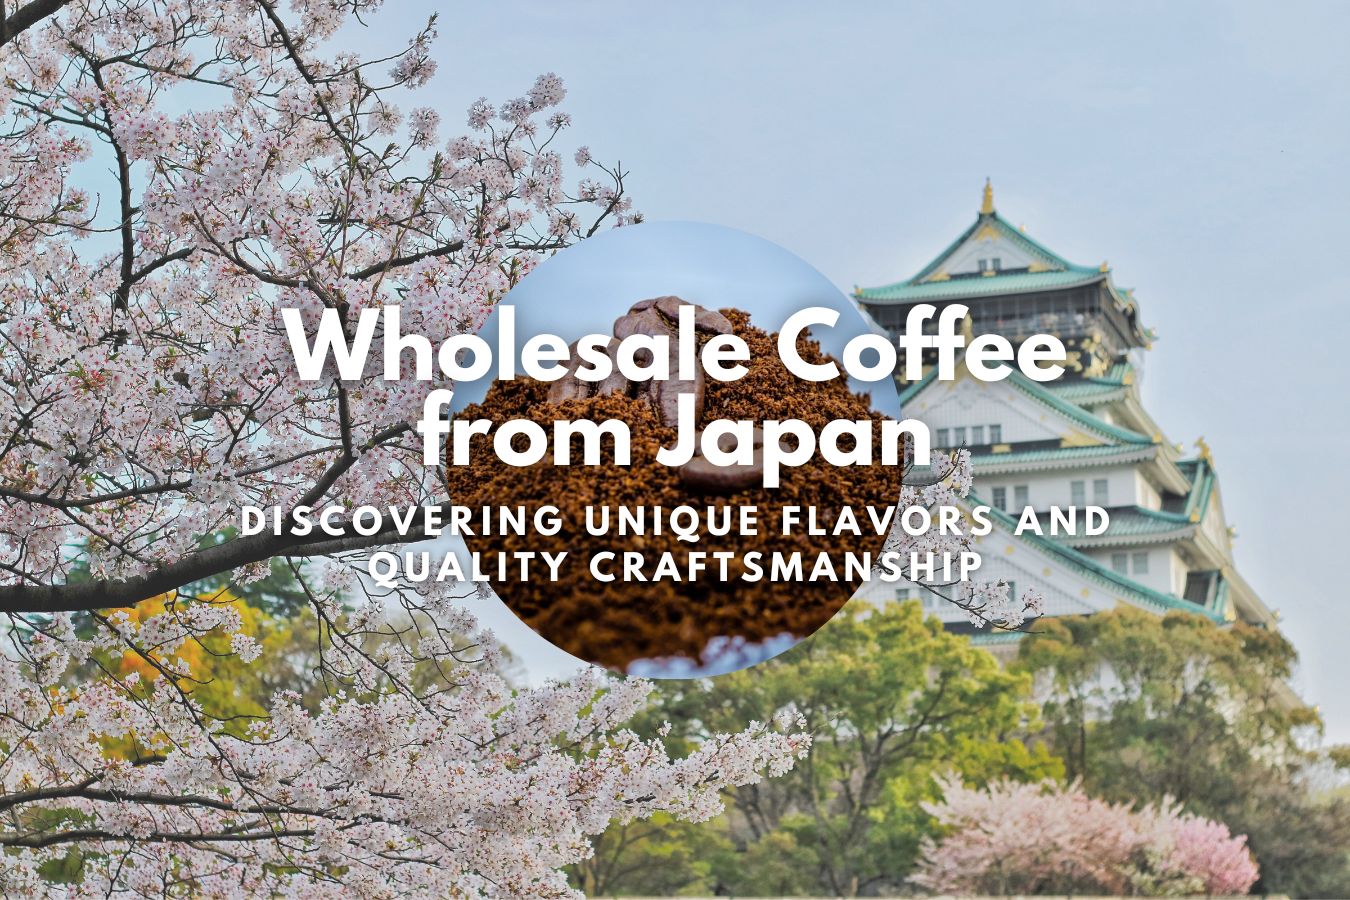 Wholesale Coffee from Japan Discovering Unique Flavors and Quality Craftsmanship